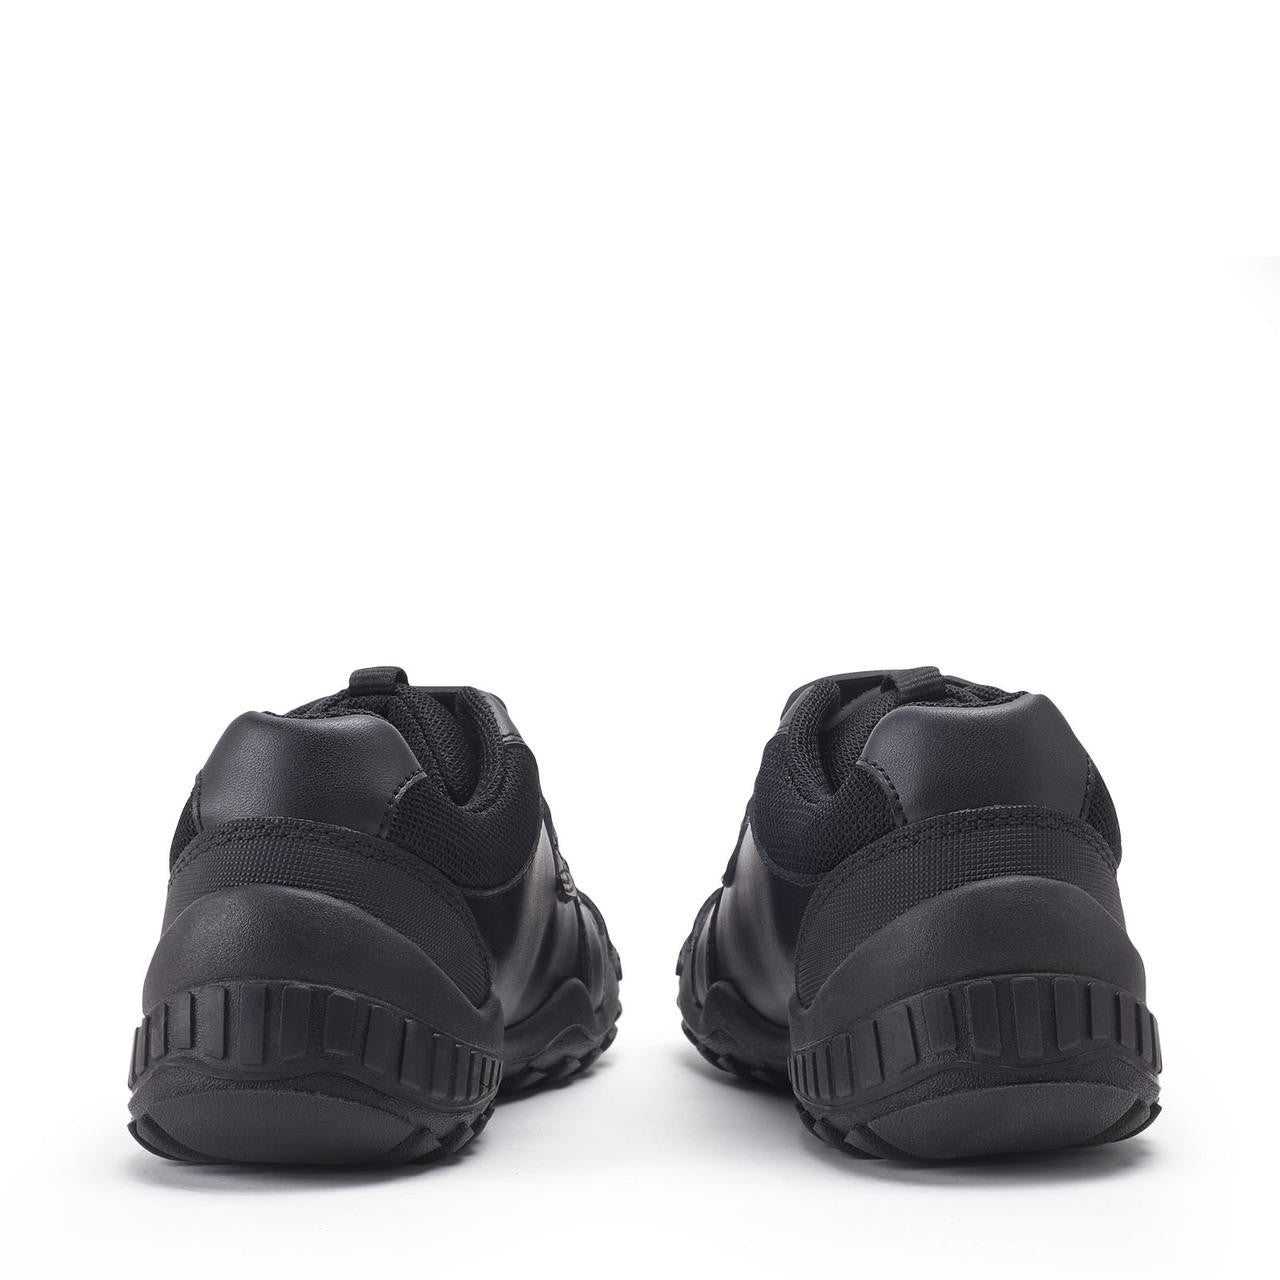 A pair of boys school shoes by Start-Rite, style Rumble in black leather with dino detail and toe, heel and side bumpers. Back view.